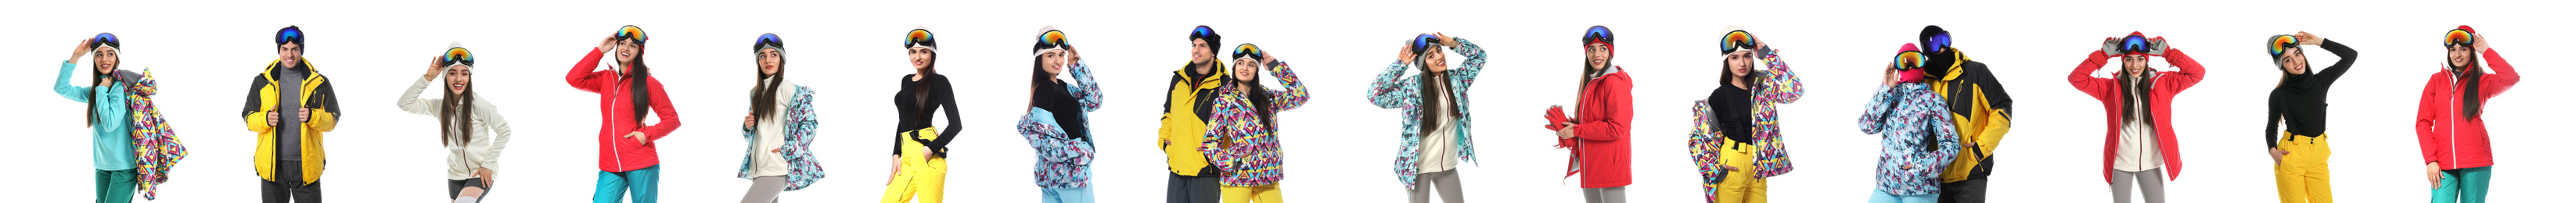 Collage of people wearing winter sports clothes on white background. Banner design 